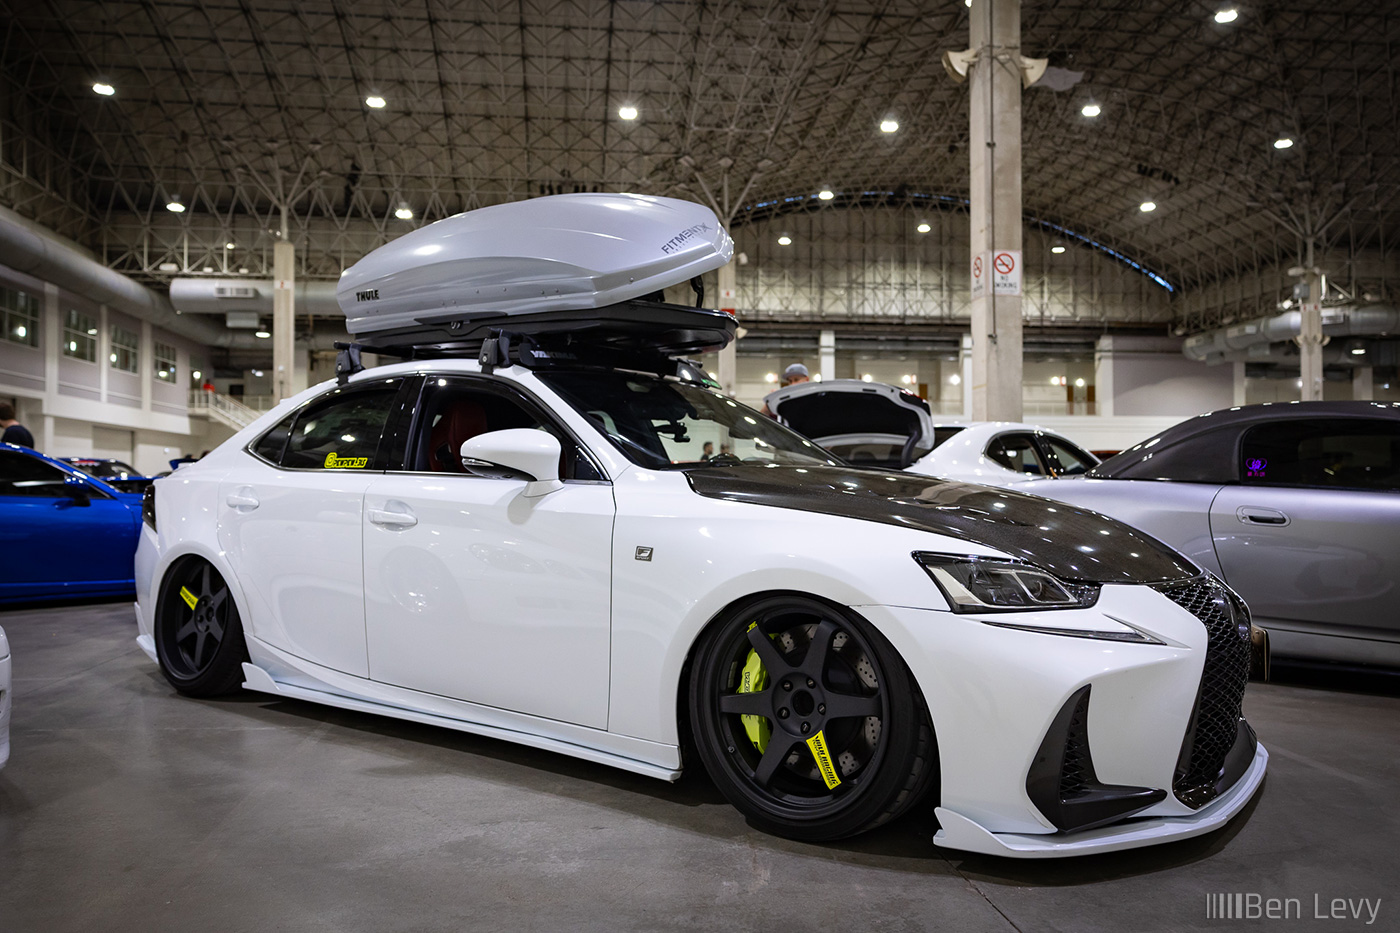 Bagged Lexus IS350 F-Sport at Wekfest Chicago